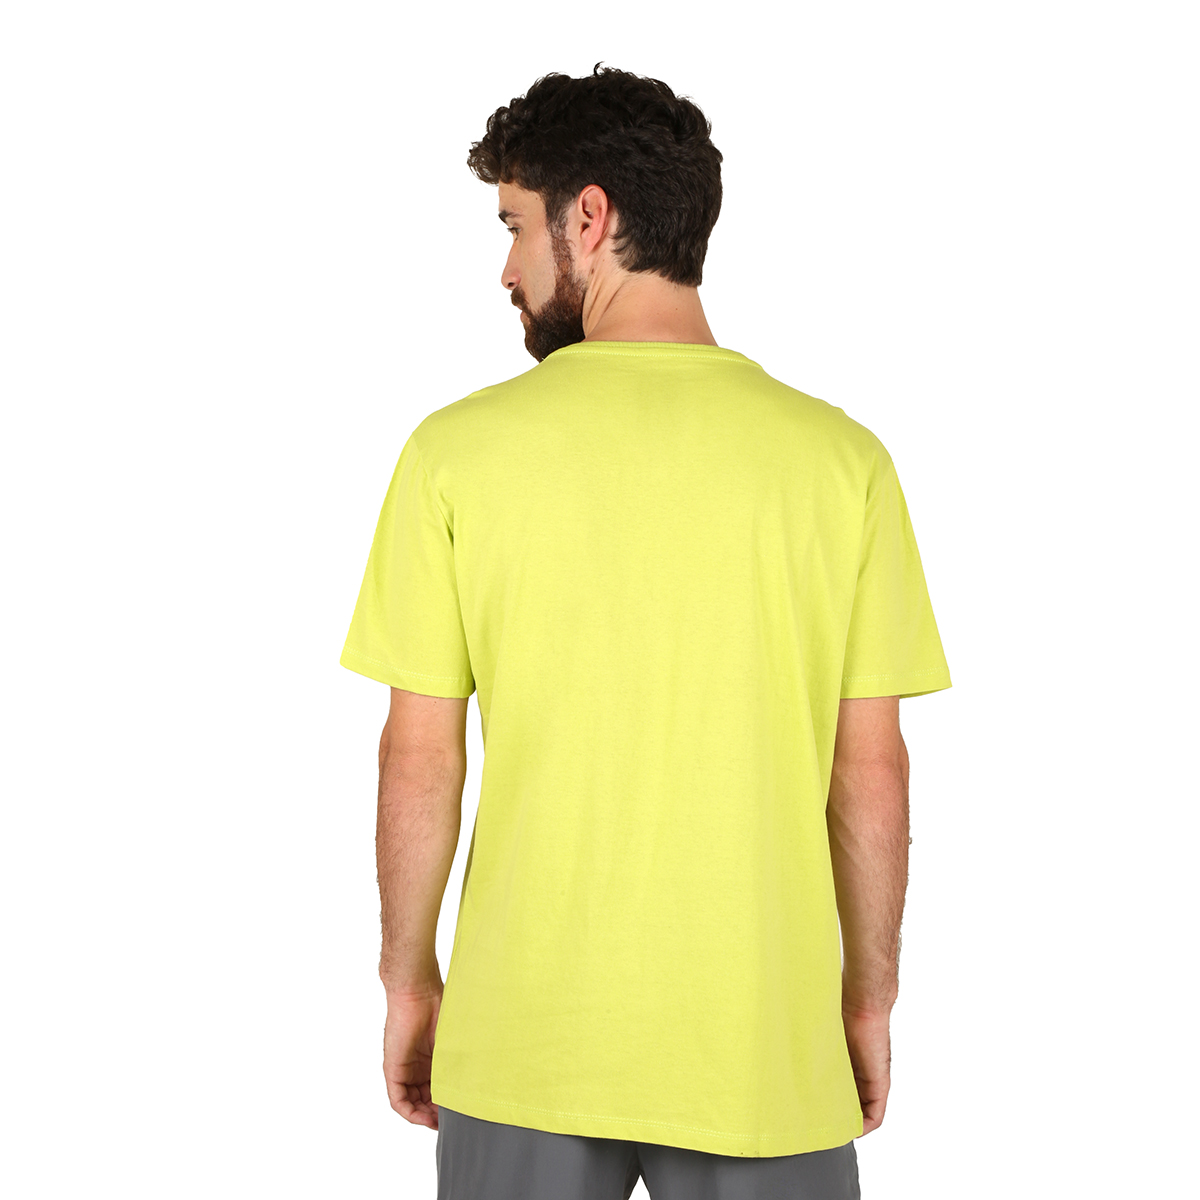 Remera Lotto Neck Round,  image number null